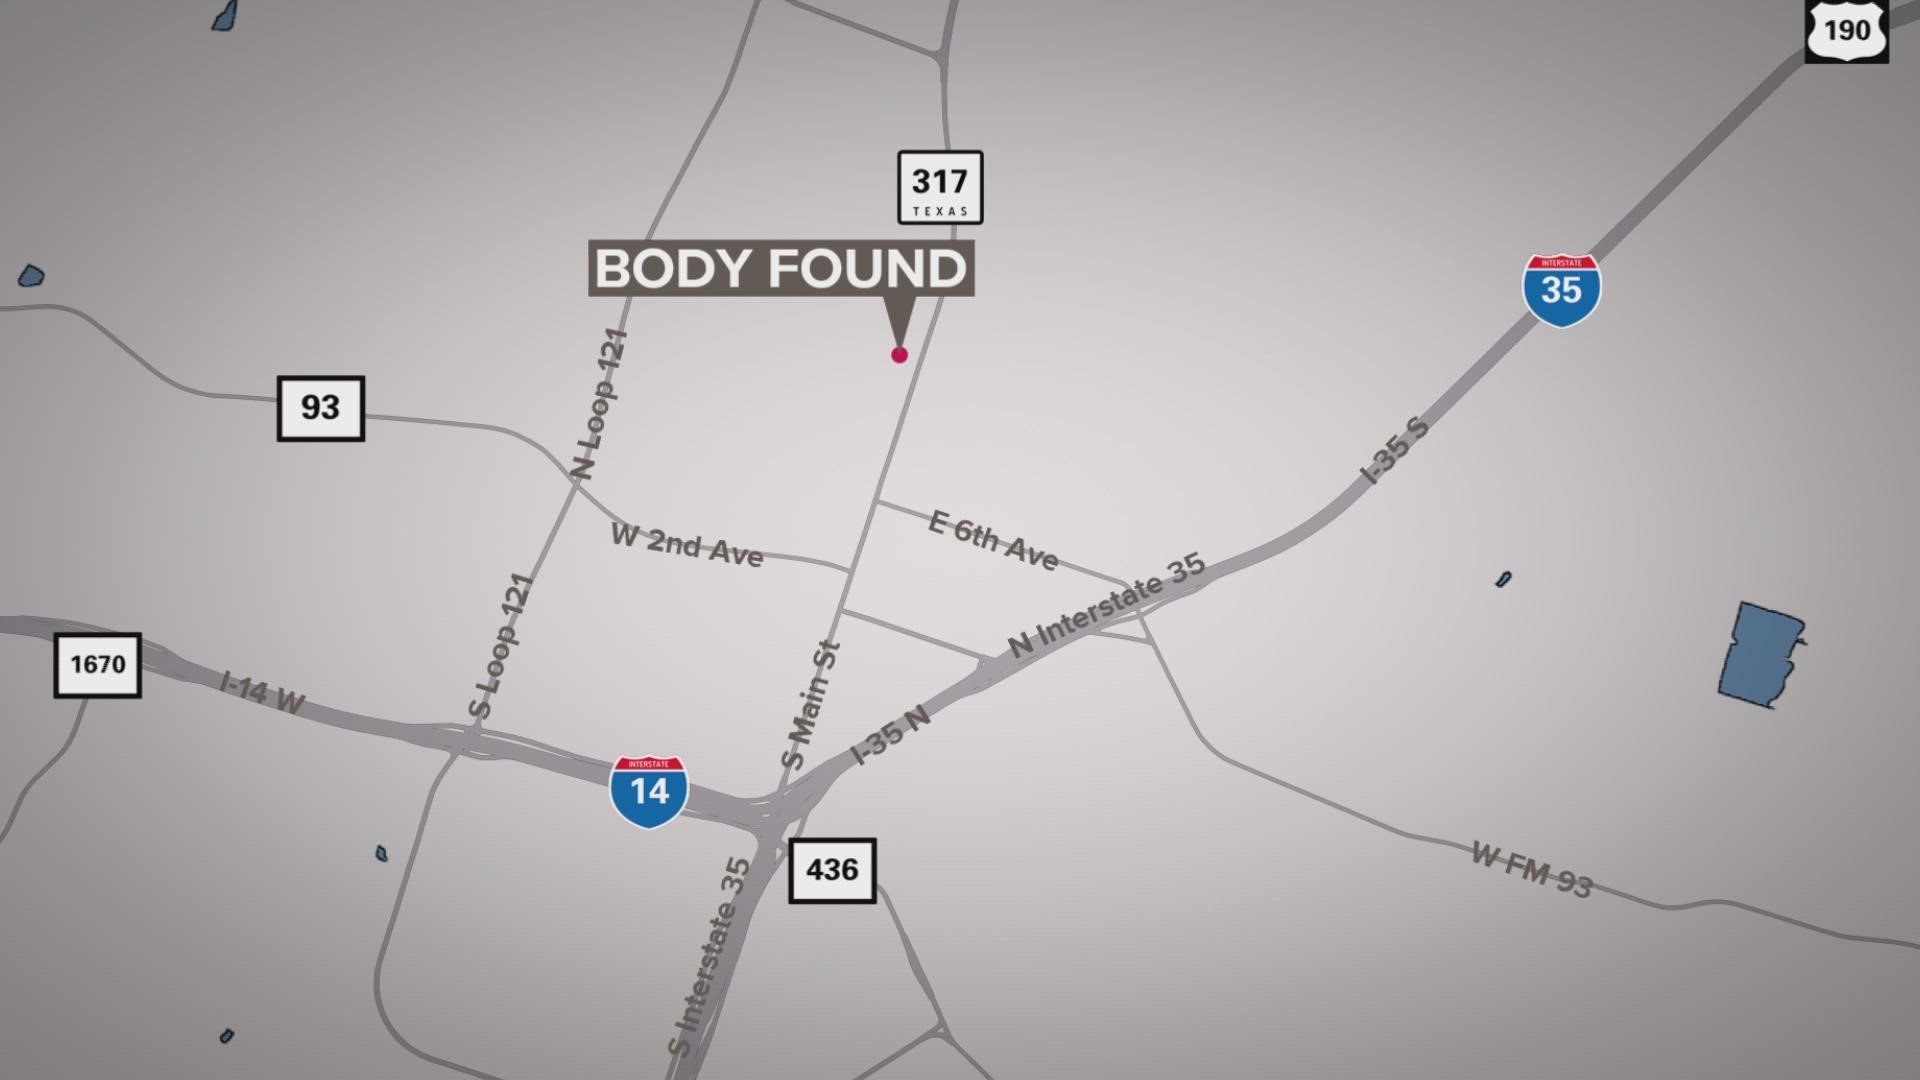 An unidentified 47-year-old woman was found dead in her home Thursday afternoon, according to the Belton Police Department.